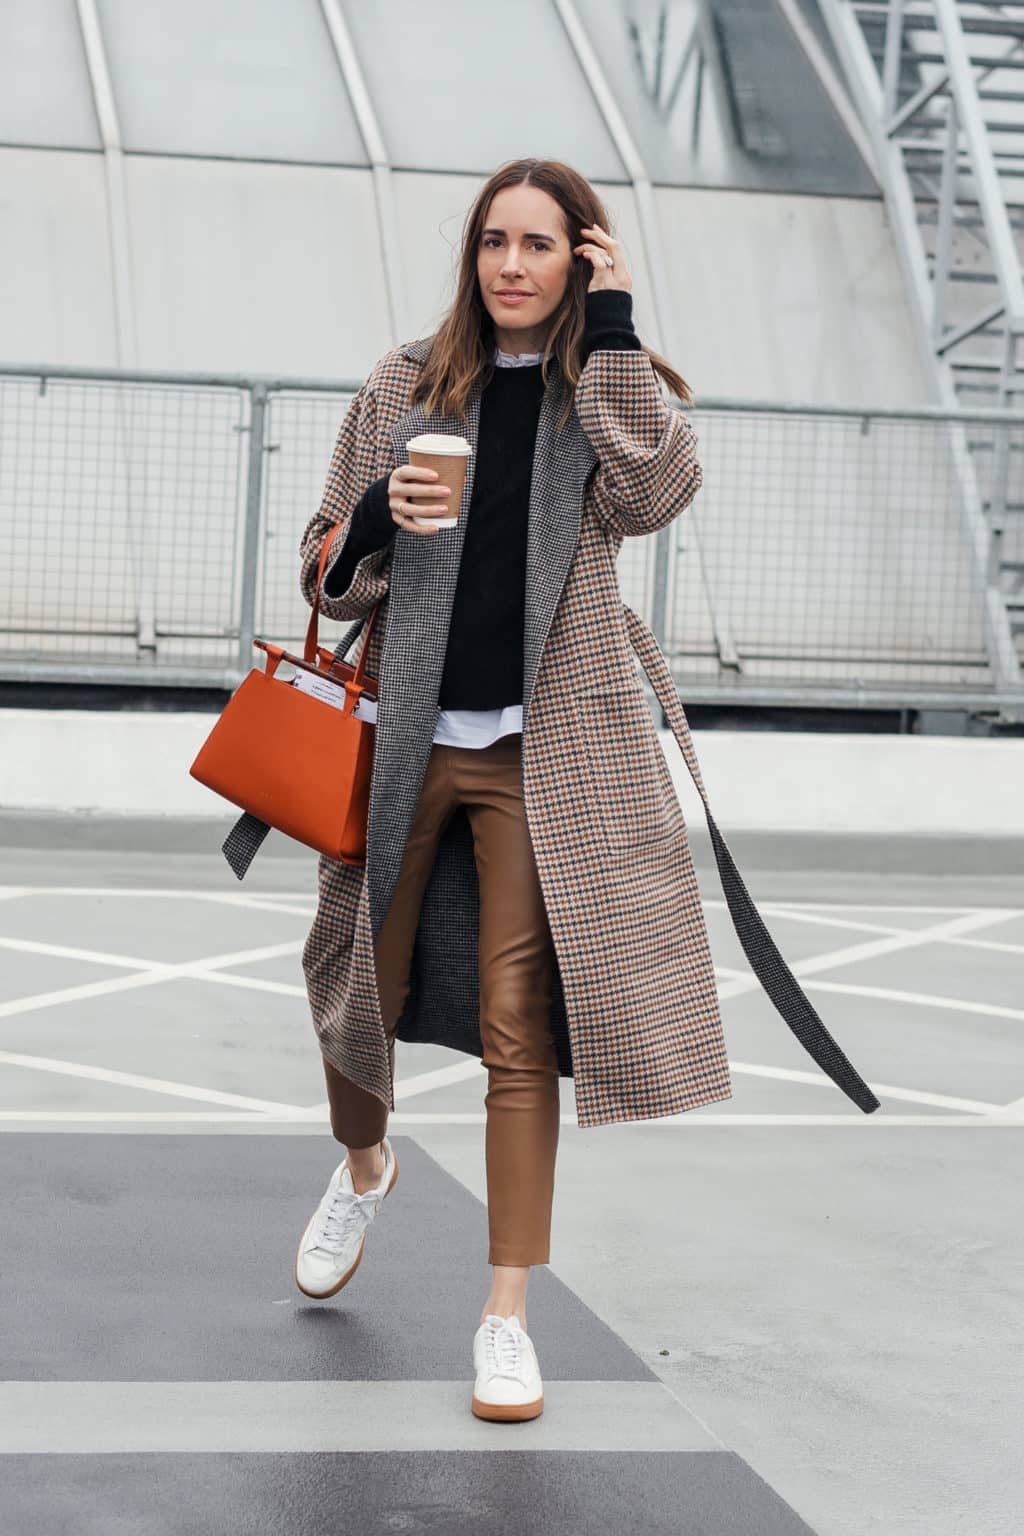 The Best Coats For Spring - Front Roe by Louise Roe